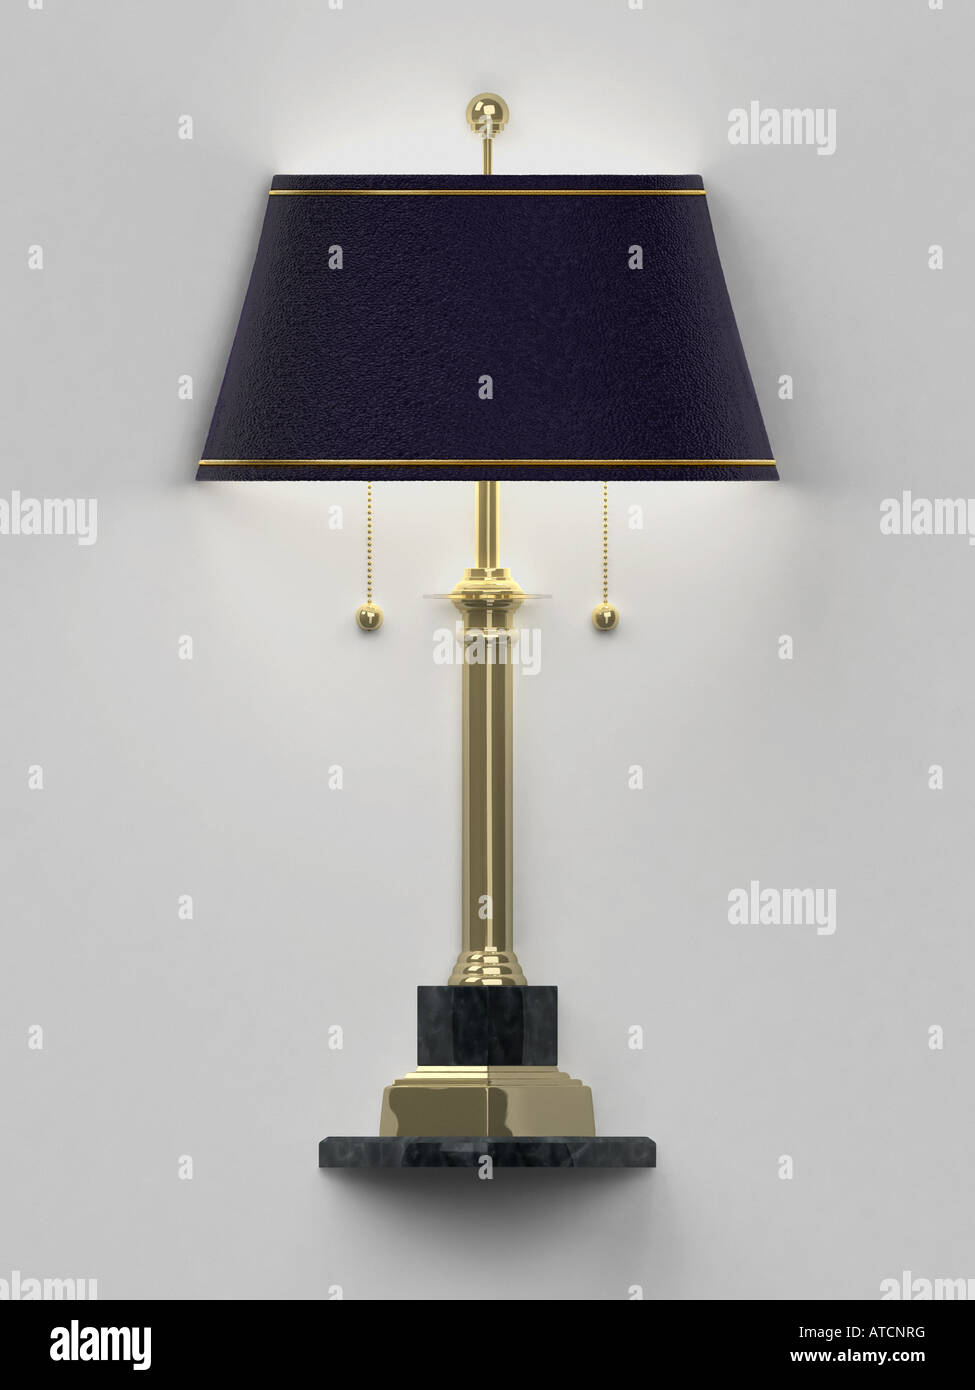 Table lamp on the wall Stock Photo